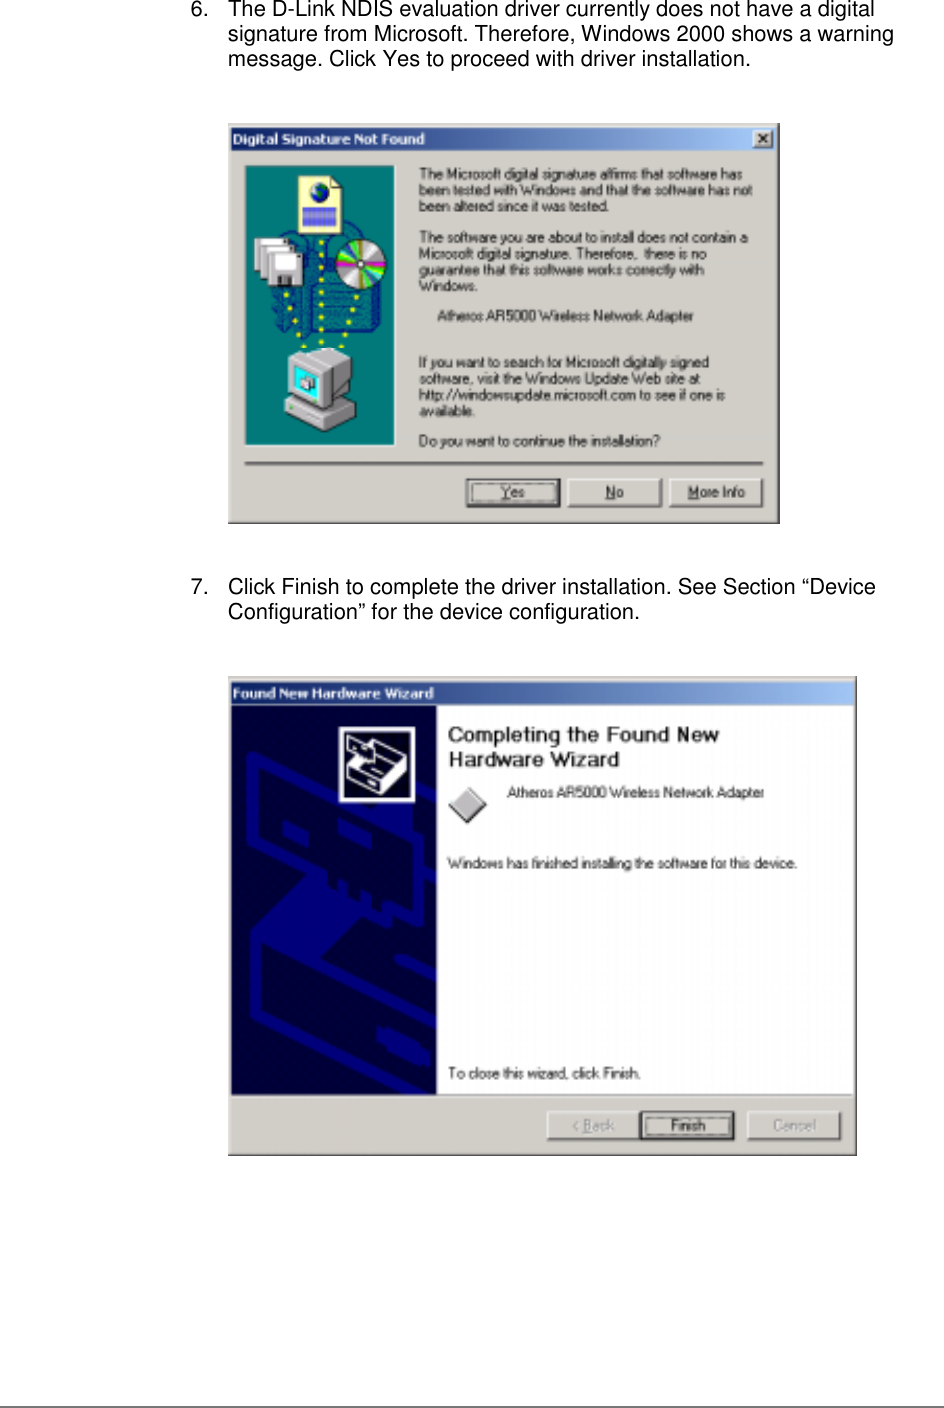 6.  The D-Link NDIS evaluation driver currently does not have a digitalsignature from Microsoft. Therefore, Windows 2000 shows a warningmessage. Click Yes to proceed with driver installation. 7.  Click Finish to complete the driver installation. See Section “DeviceConfiguration” for the device configuration.